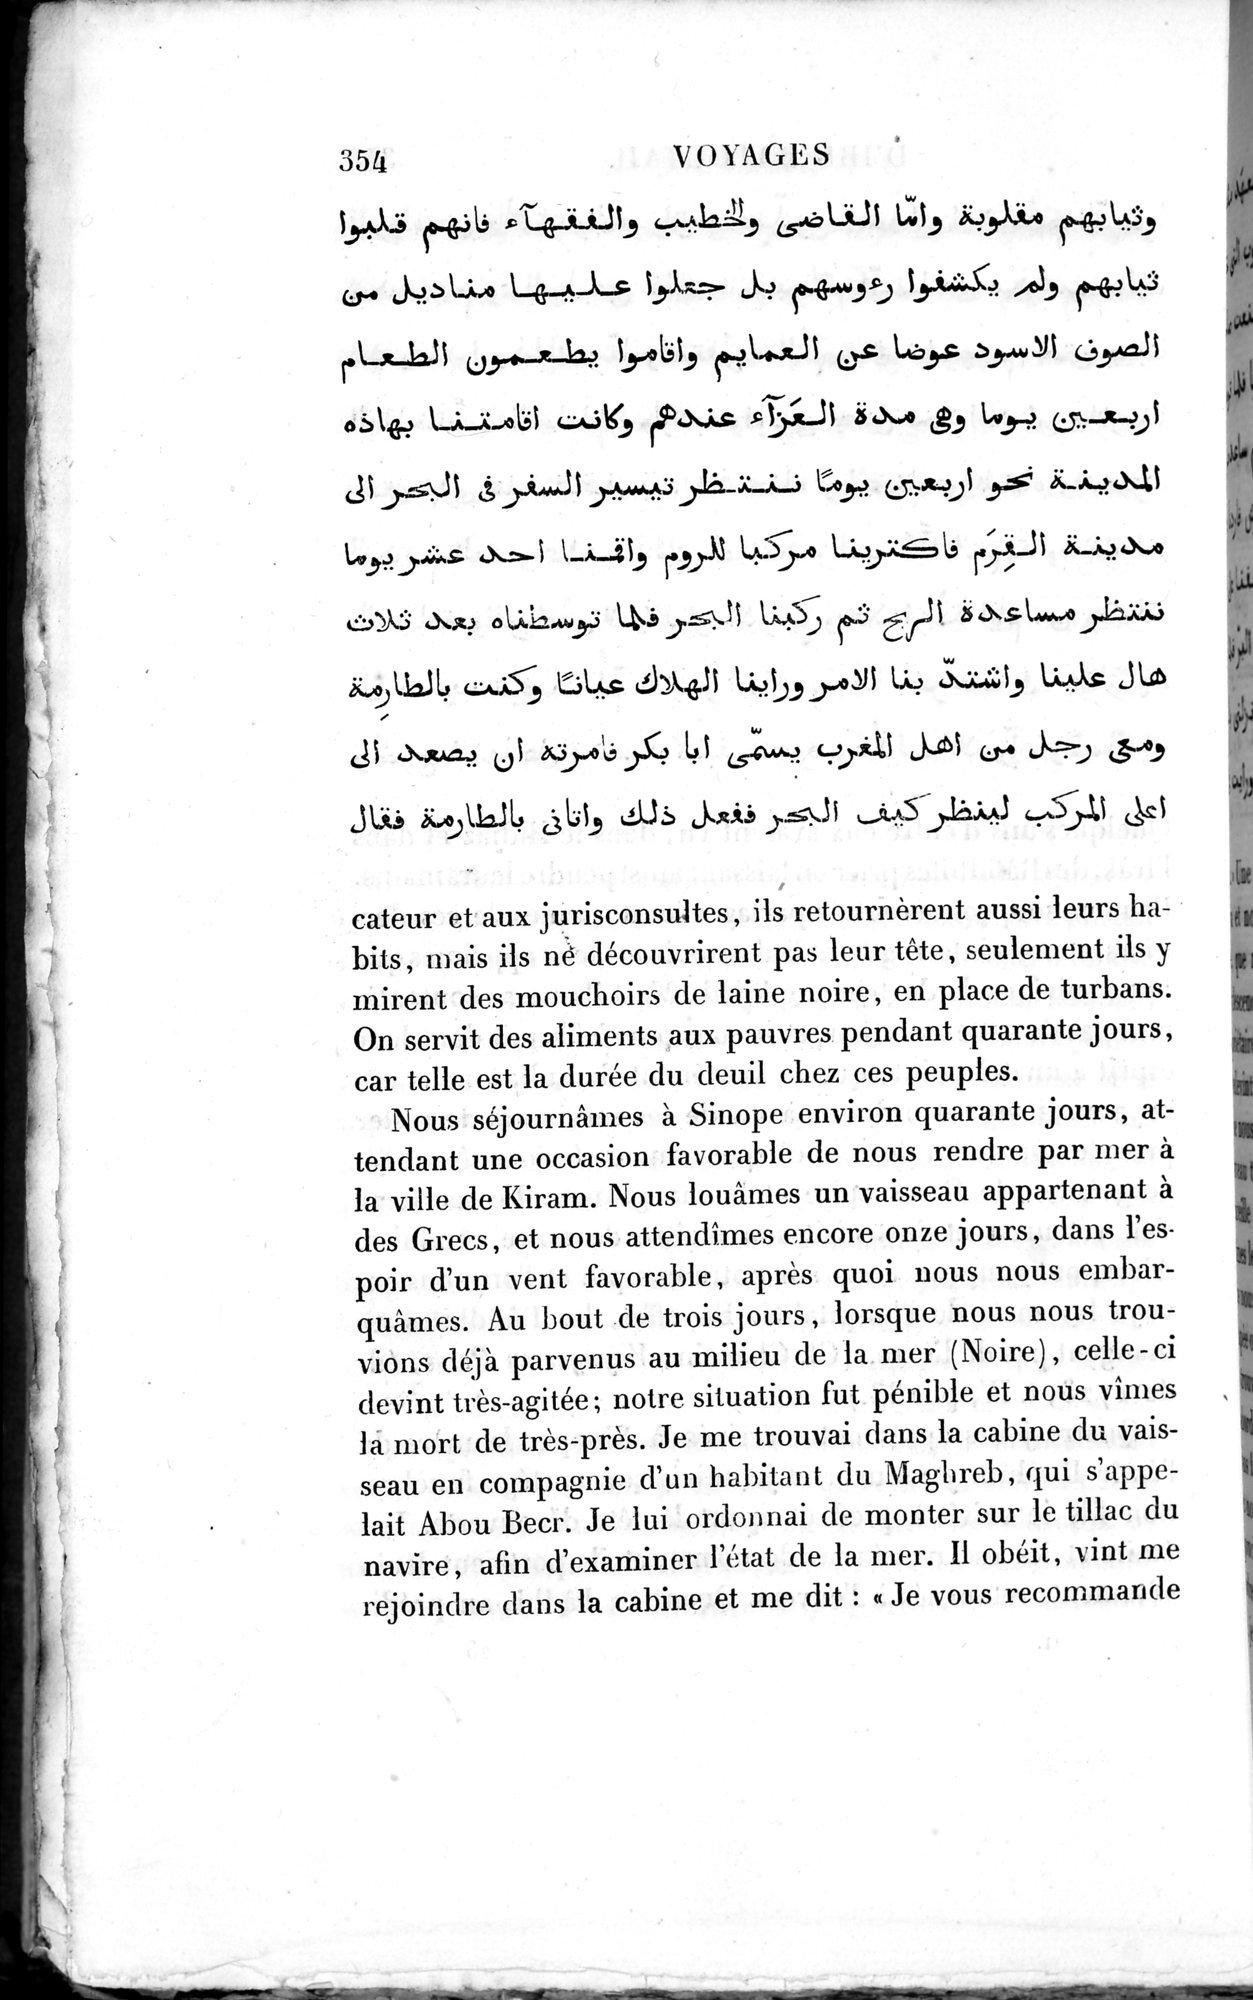 Voyages d'Ibn Batoutah : vol.2 / Page 382 (Grayscale High Resolution Image)